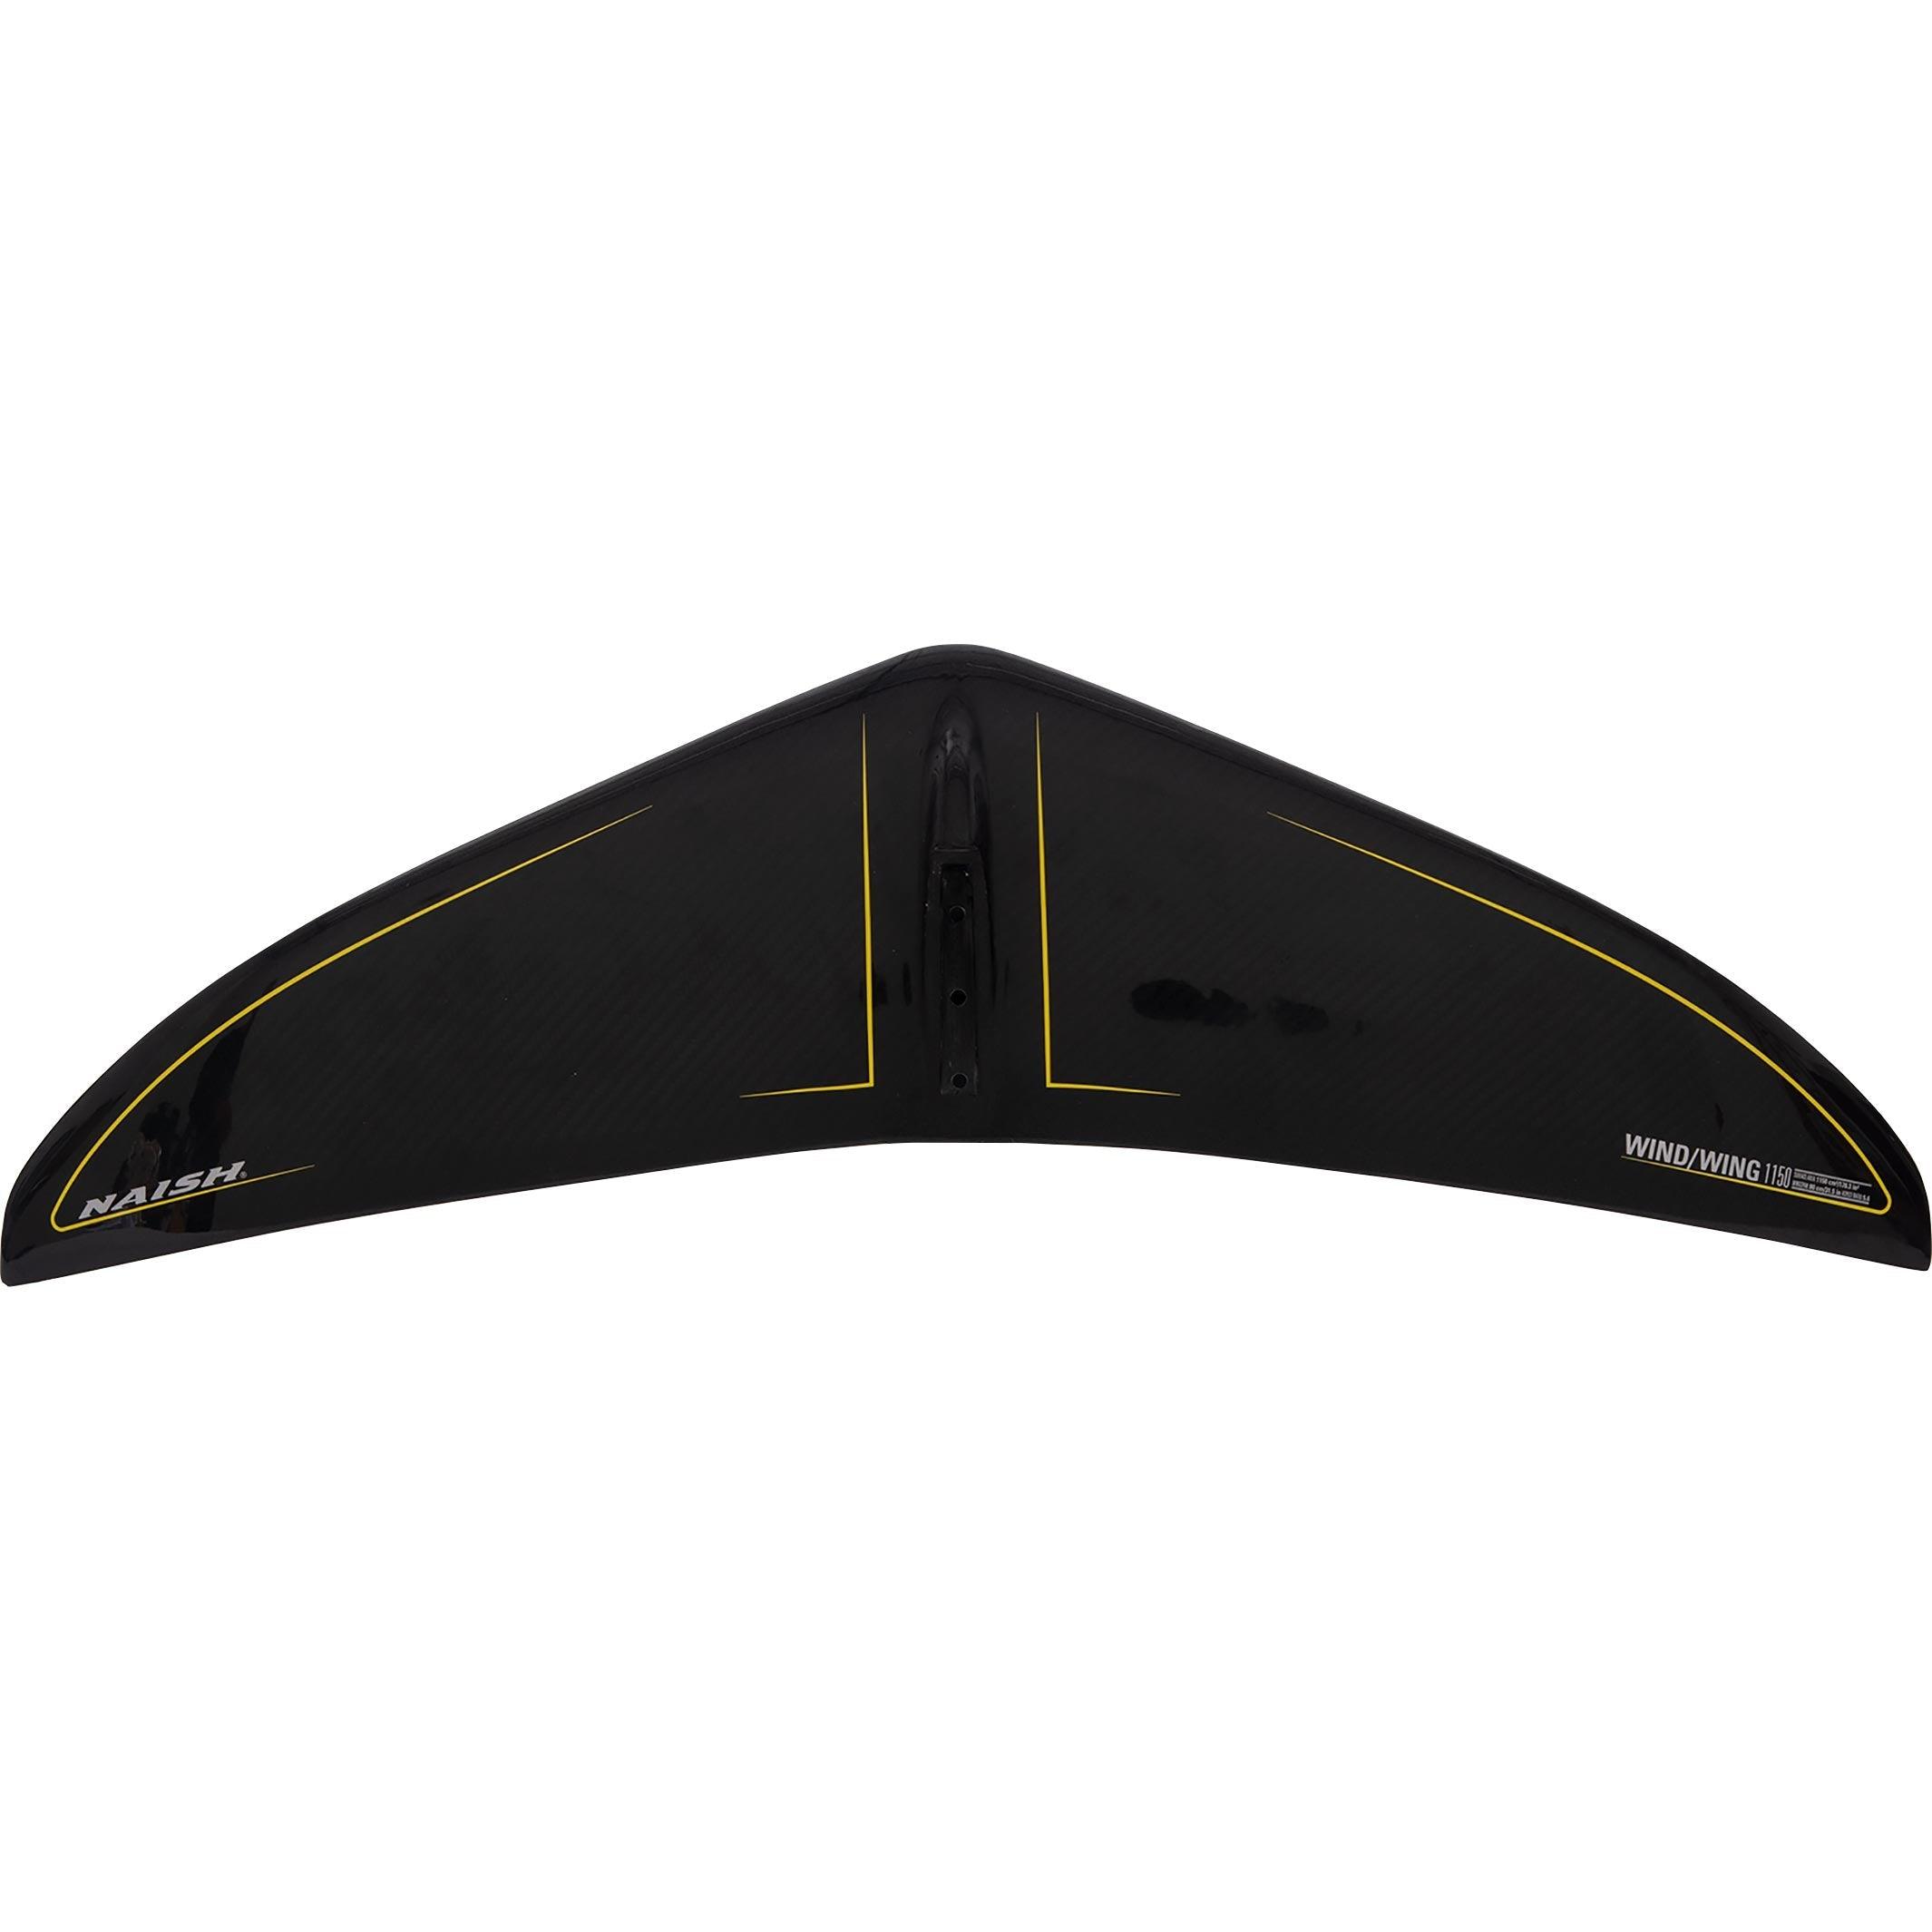 S26 Wind/Wing Front Wing - Naish.com